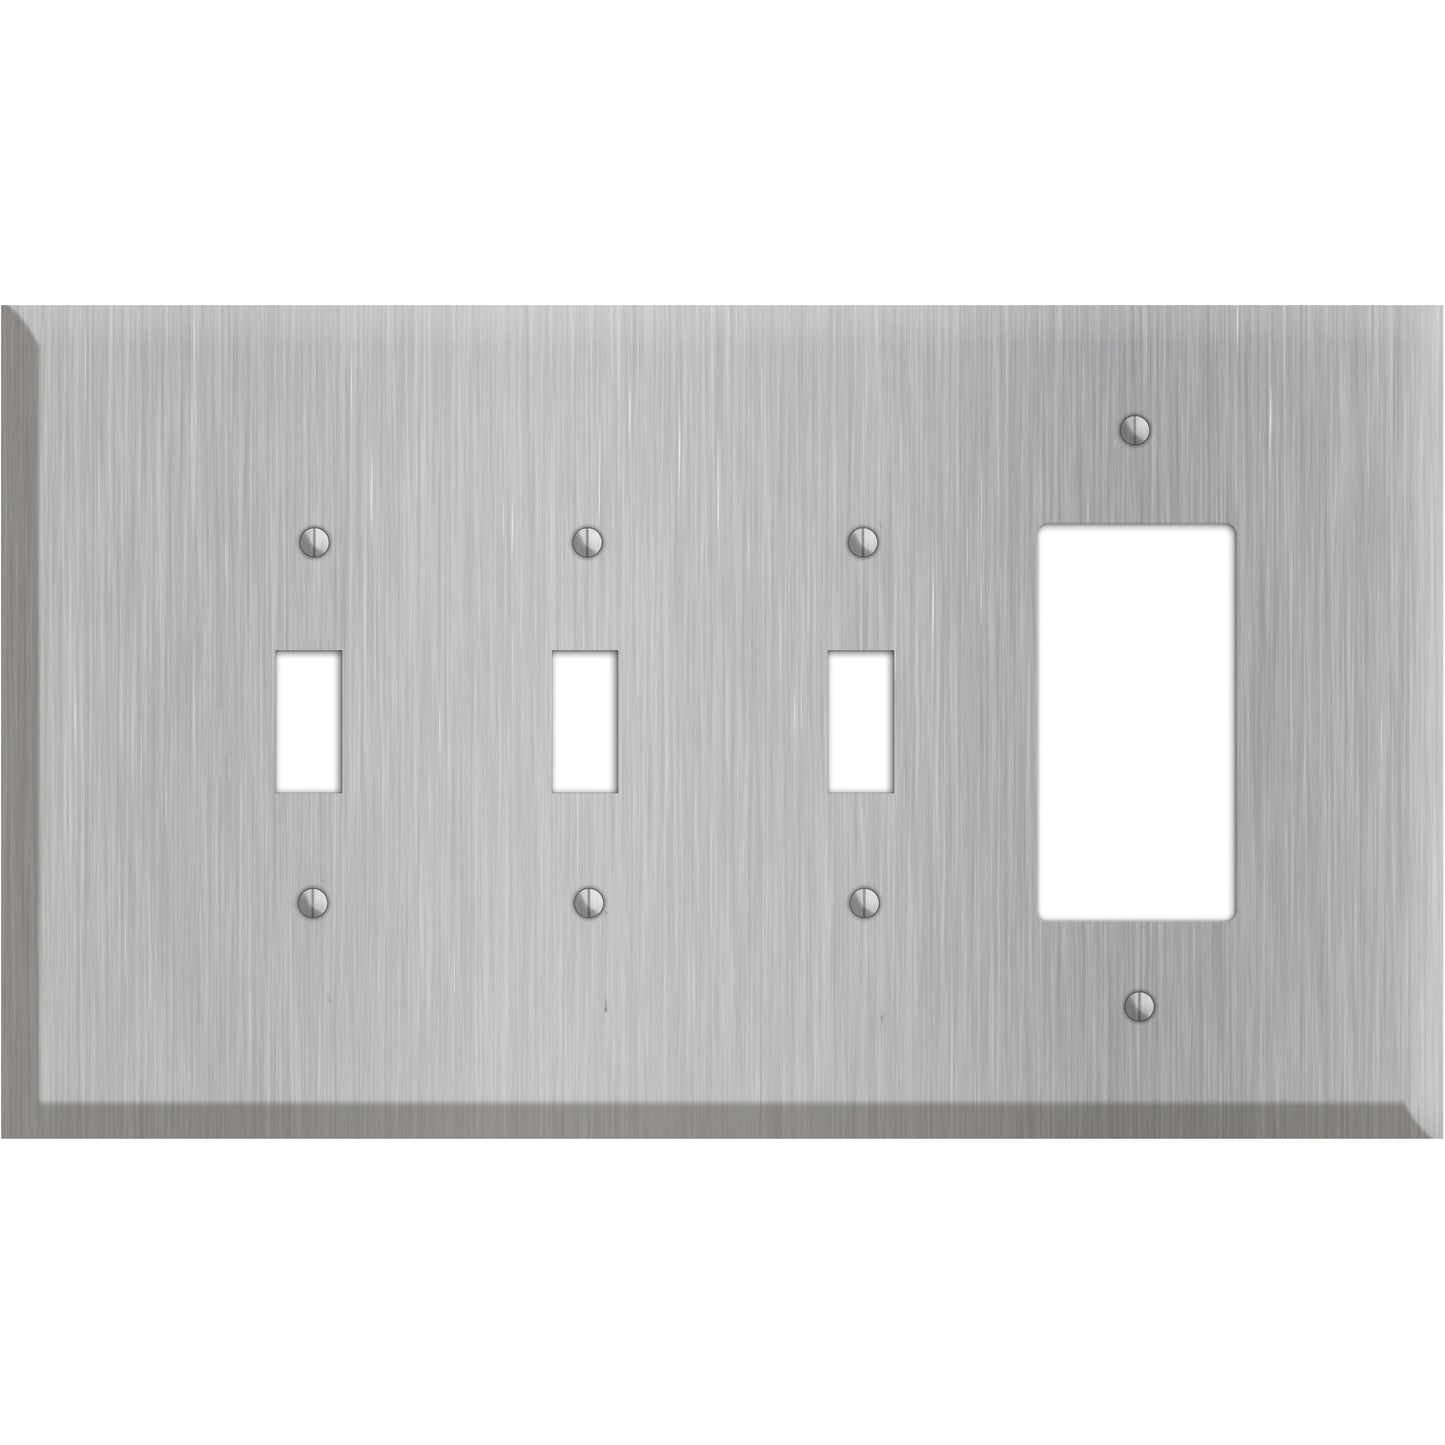 Oversized Discontinued Stainless Steel 3 Toggle / Rocker Wallplate